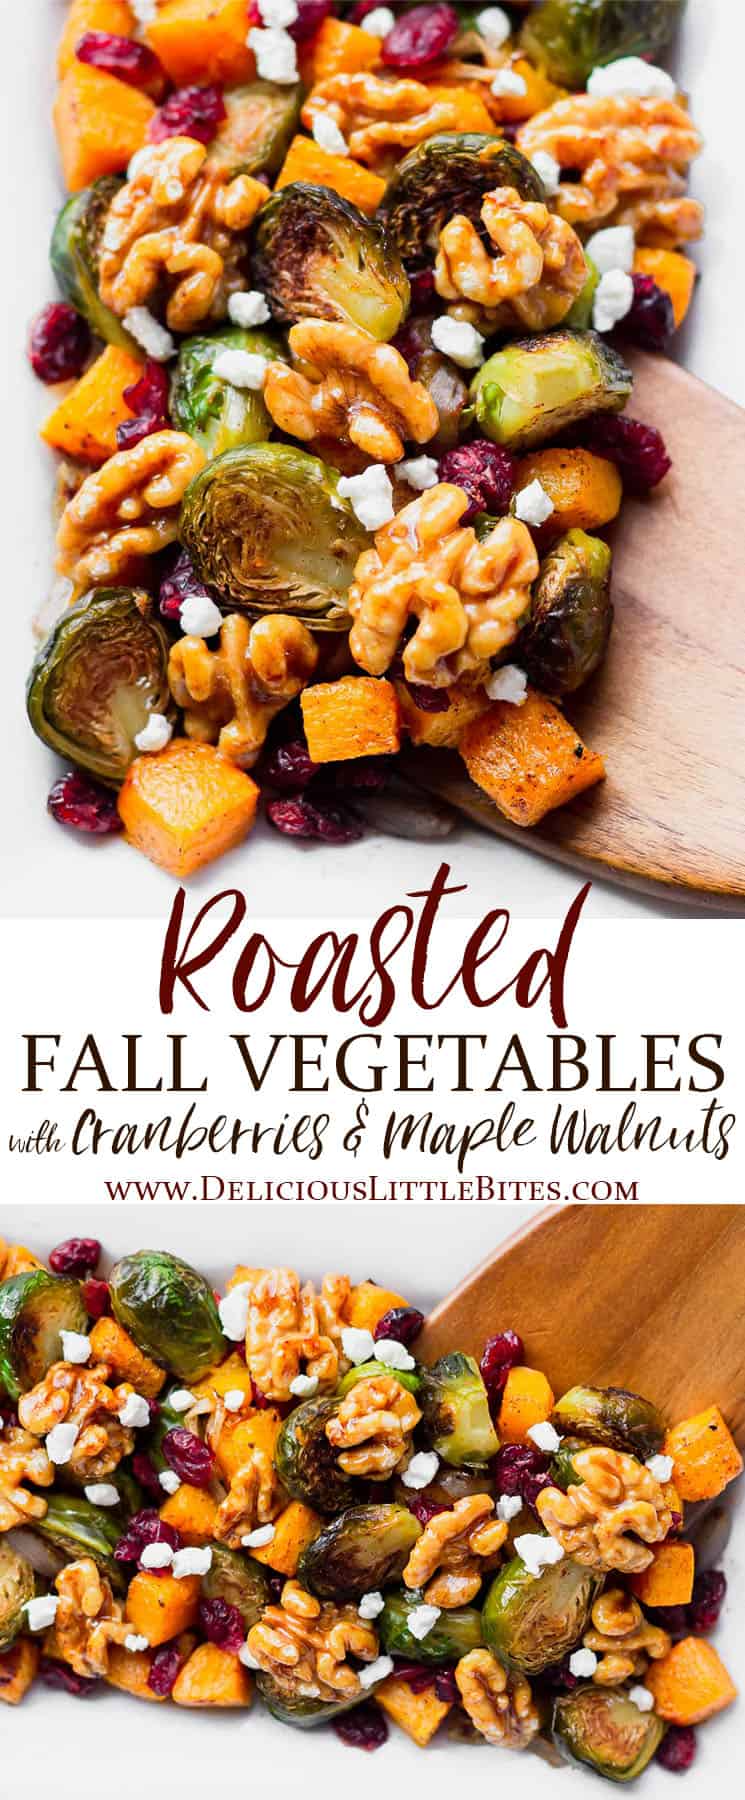 Roasted Fall Vegetables (with Cranberries & Maple Walnuts) - Delicious Little Bites -   19 vegetable sides for thanksgiving dinner ideas